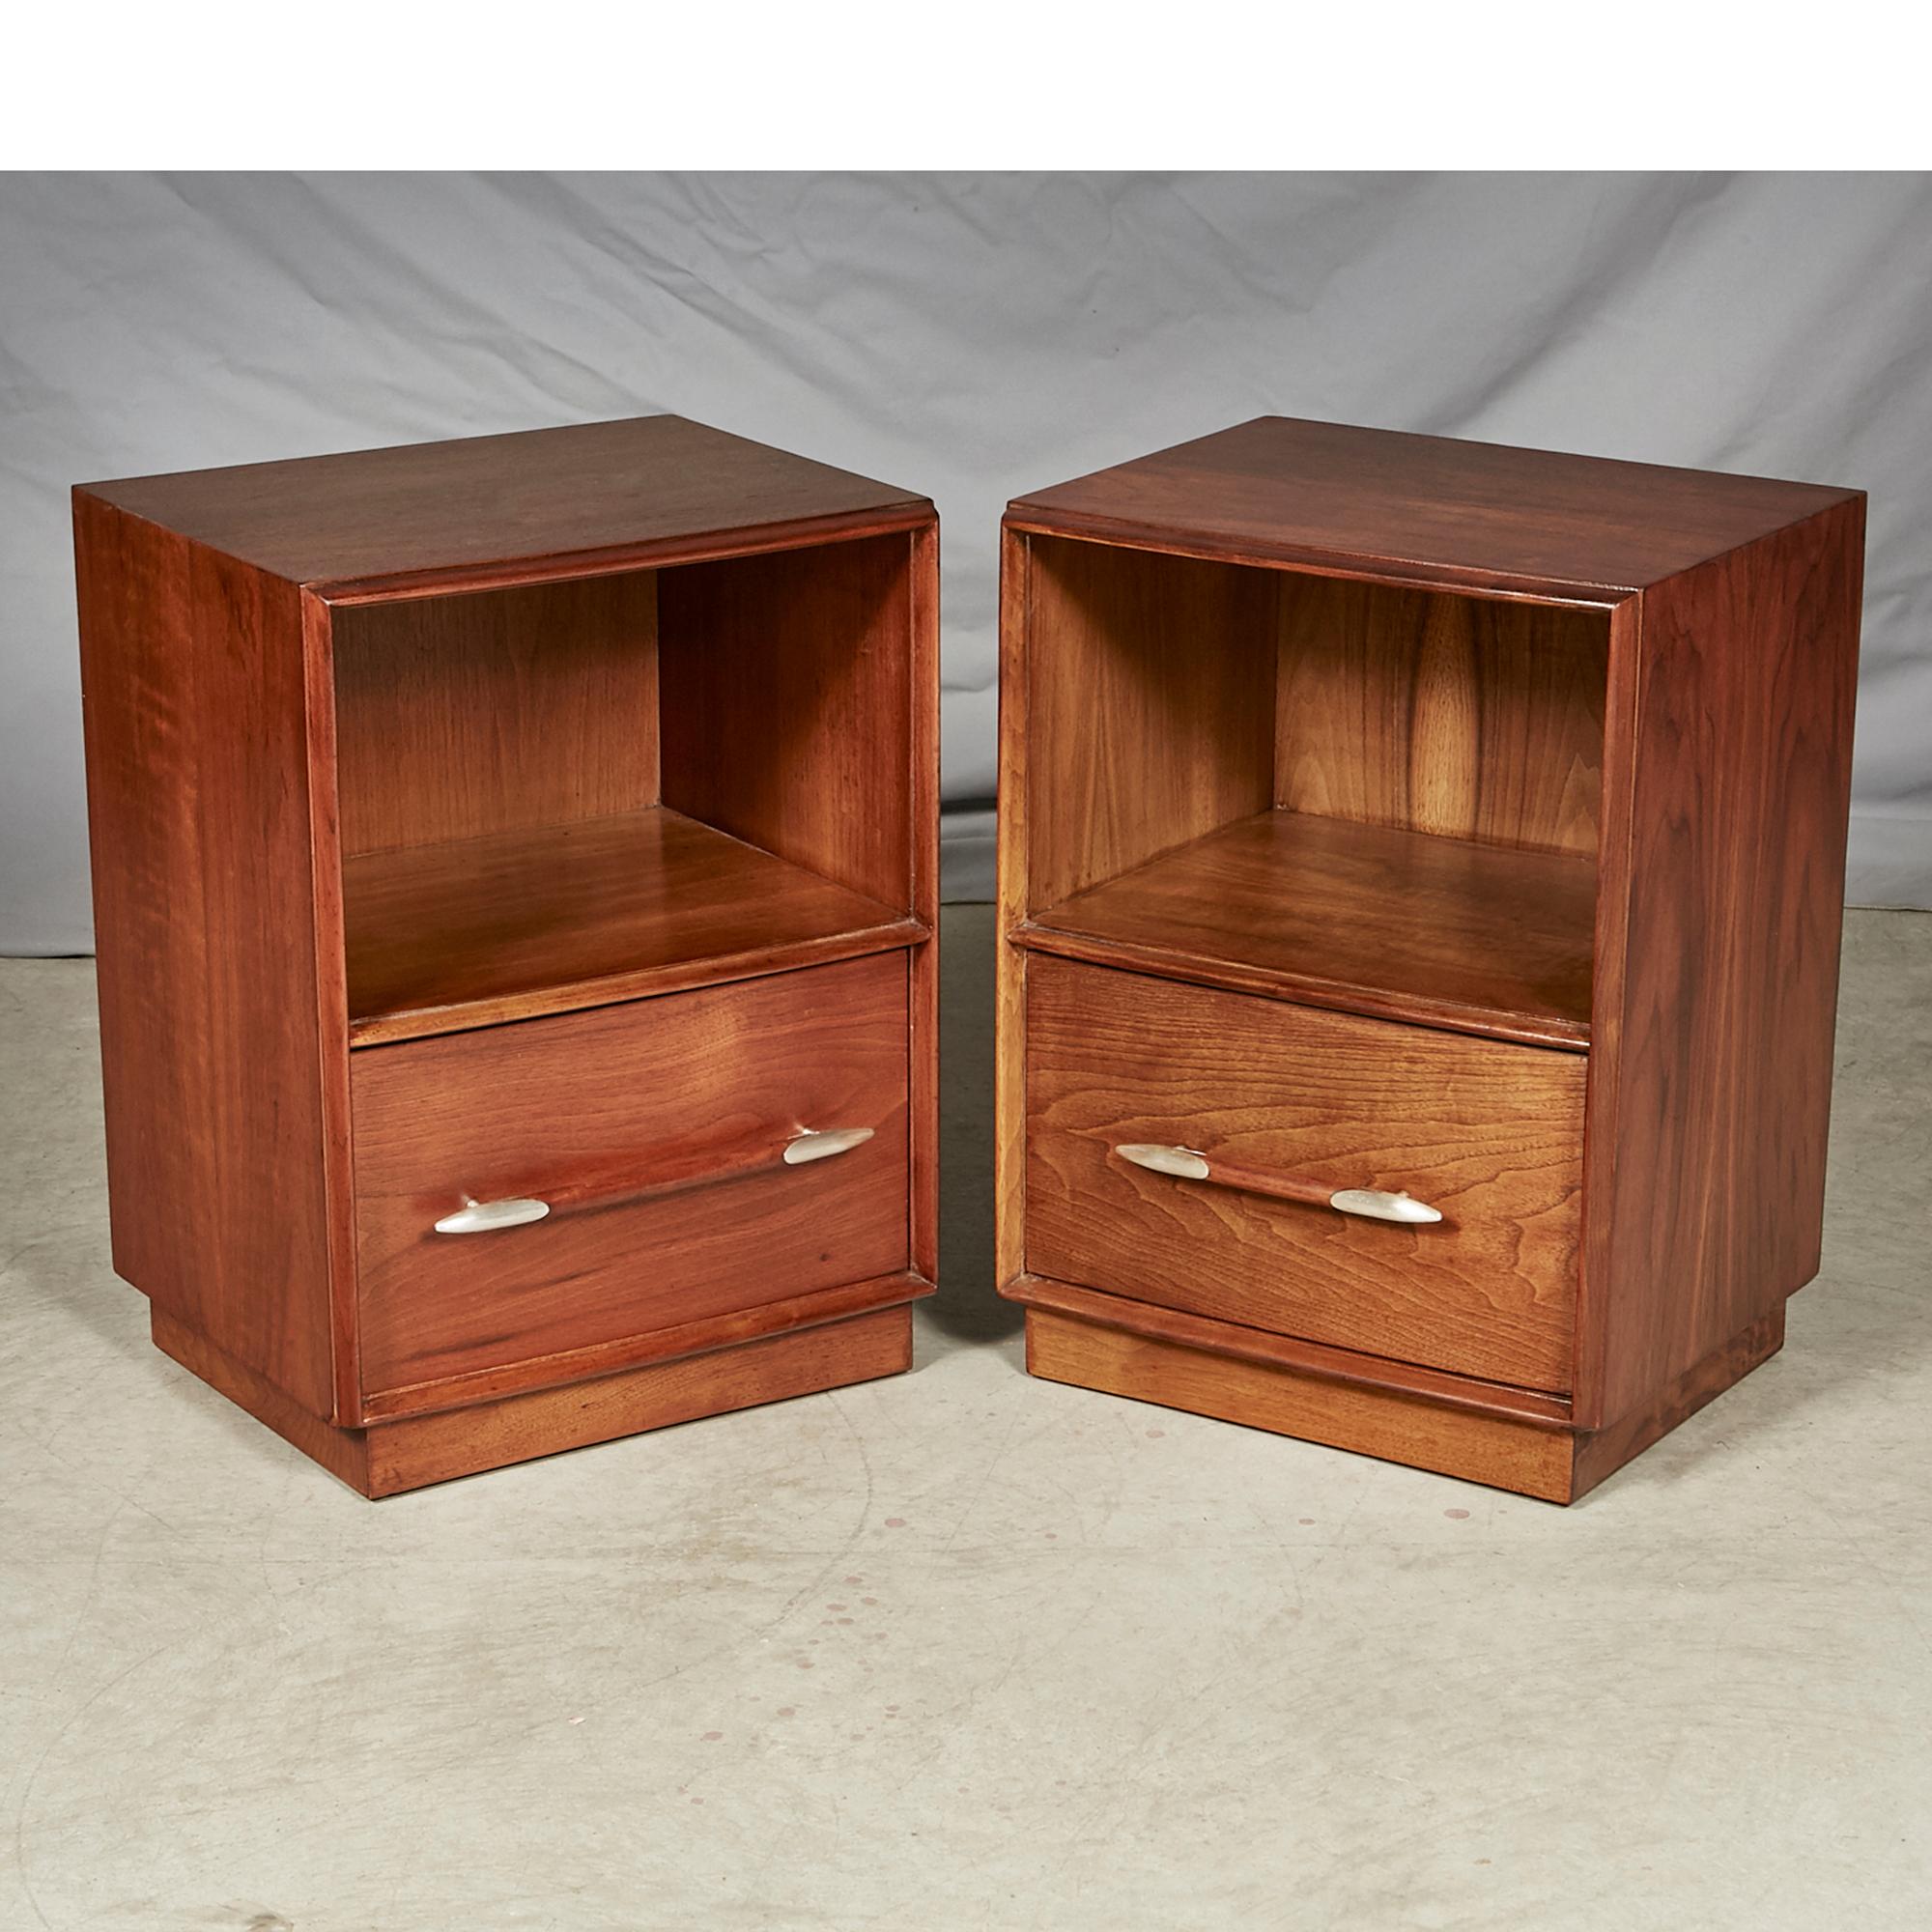 1950s Walnut Nightstands by T.H. Robsjohn-Gibbings for John Widdicomb, Pair In Good Condition For Sale In Amherst, NH